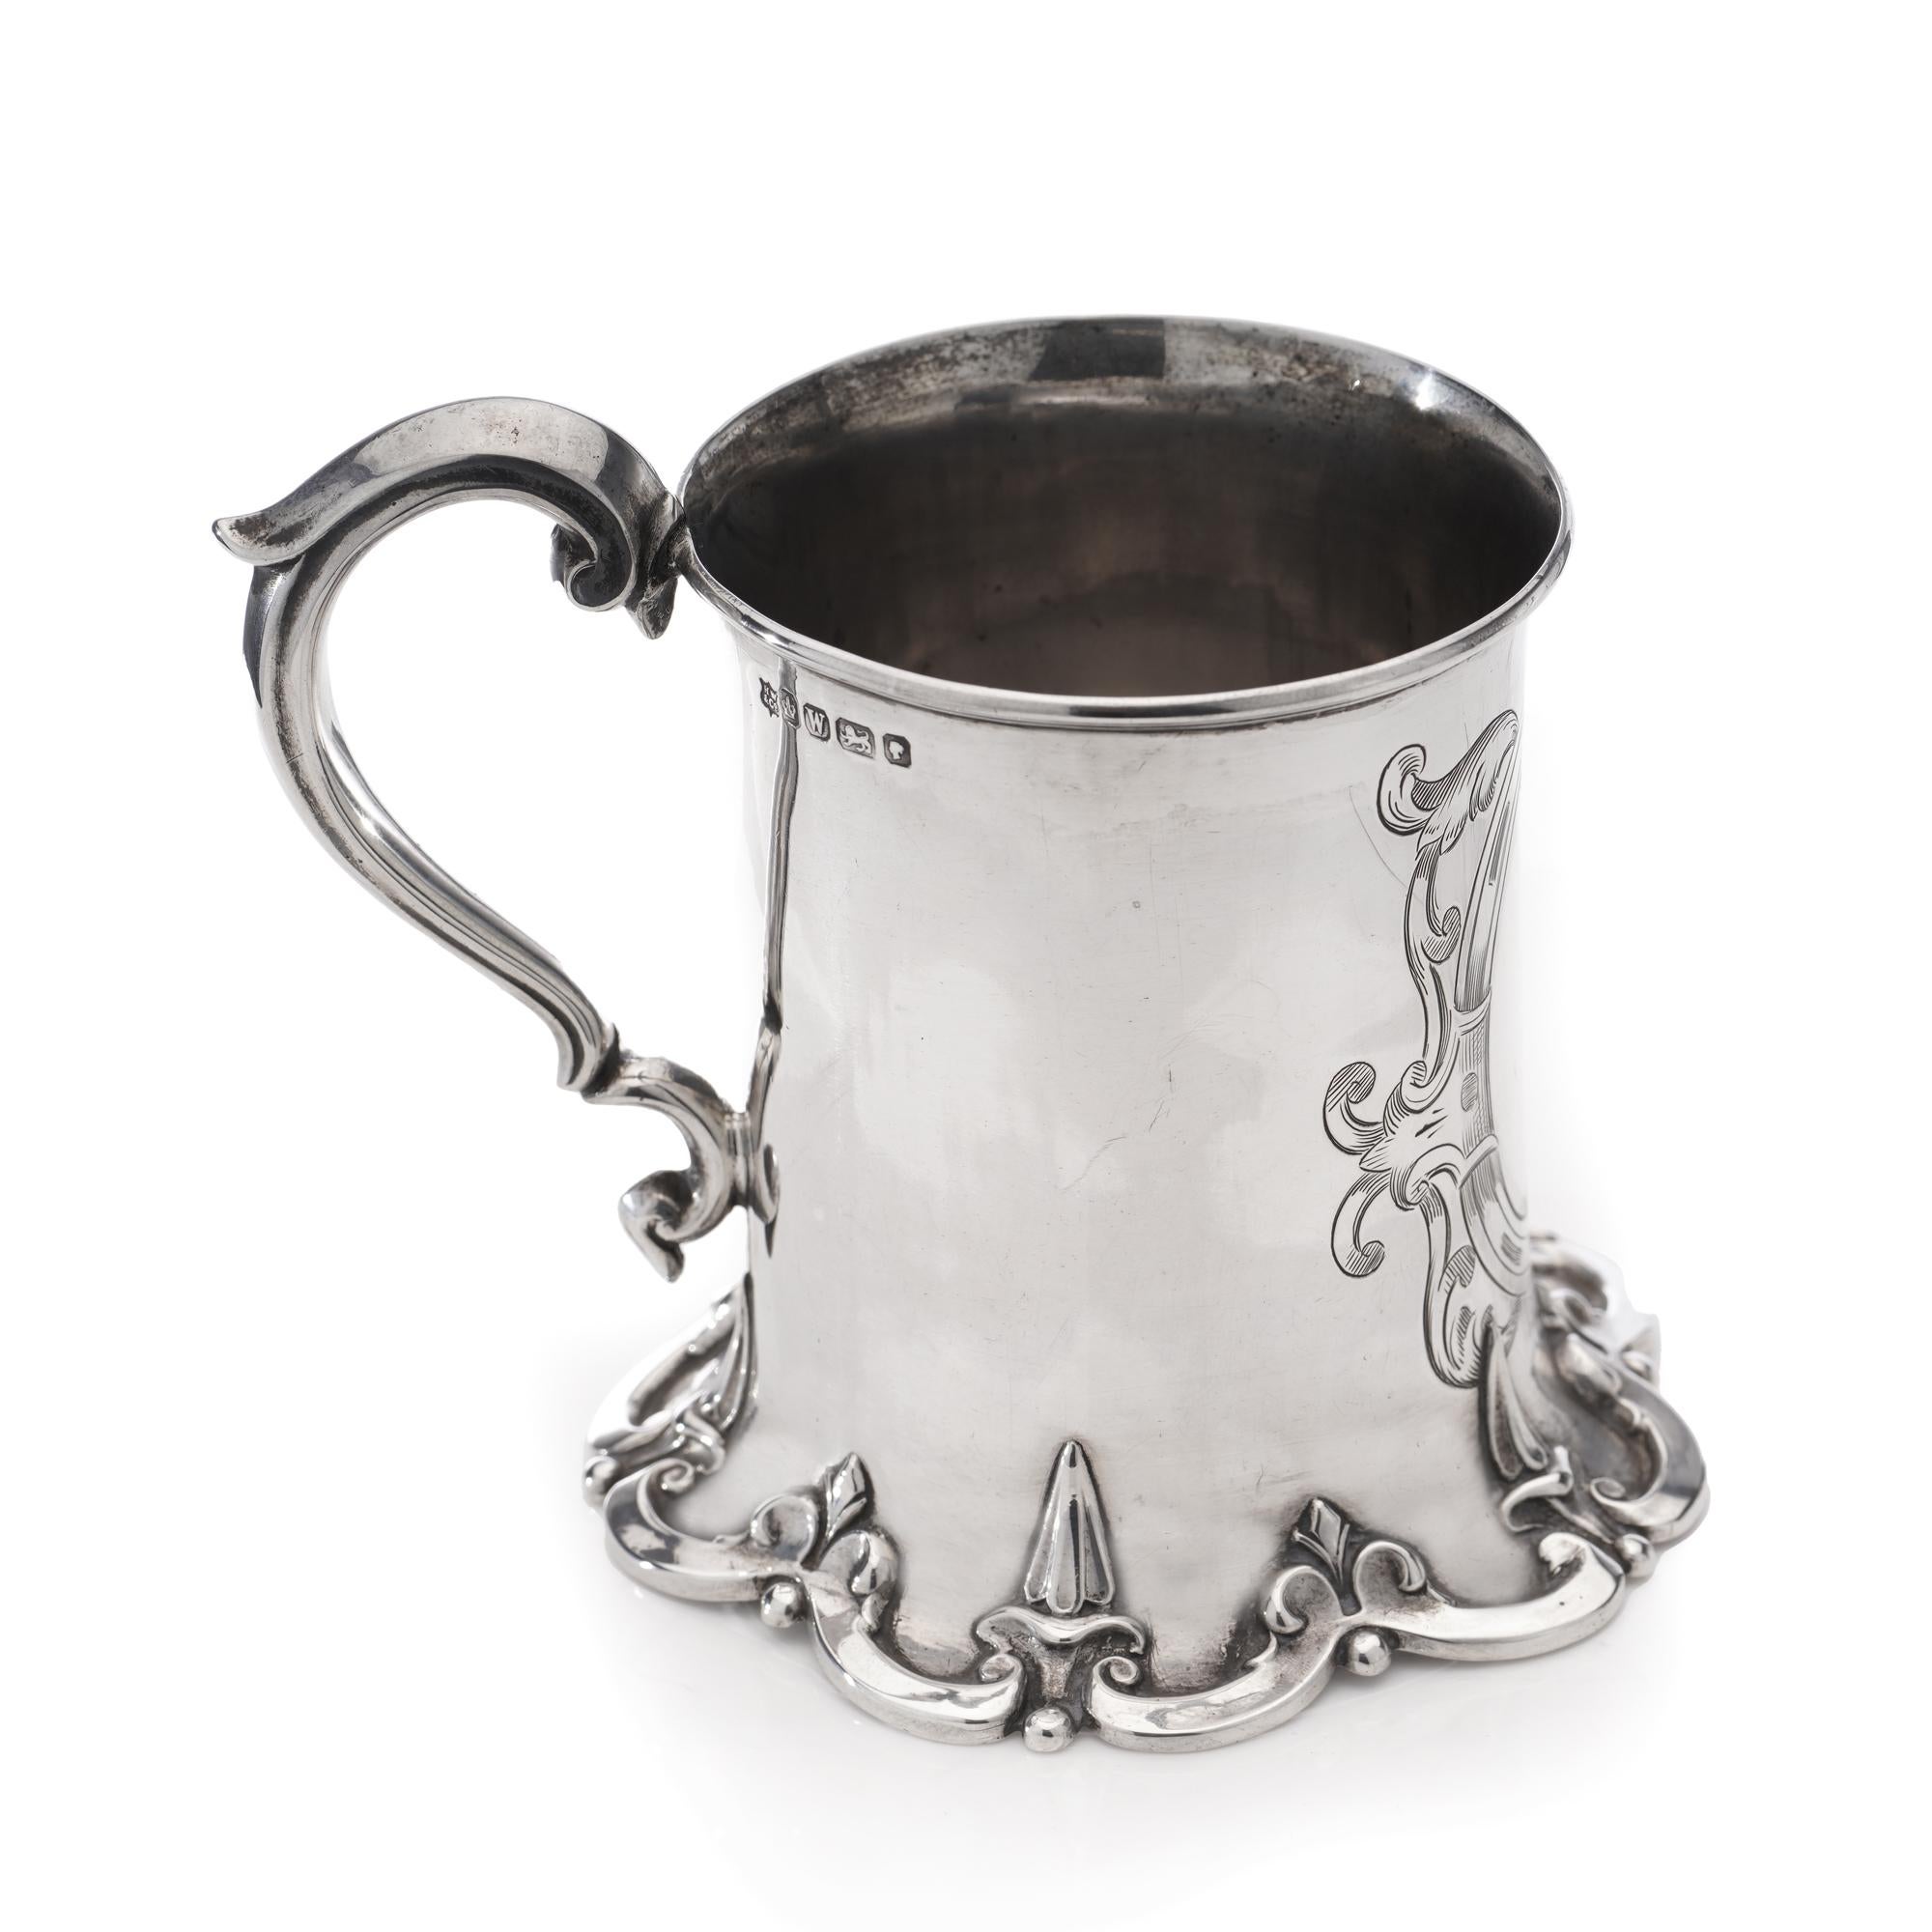 Antique Victorian highly ornate mug with cartouche and scrolls. 
Made in England, Sheffield, 1864
Maker: Henry Wilkinson & Co
Fully hallmarked.

 Approx. Dimensions - 
Length x width x height: 11 x 9 x 9.3 cm
 Weight: 137 grams in total. 

